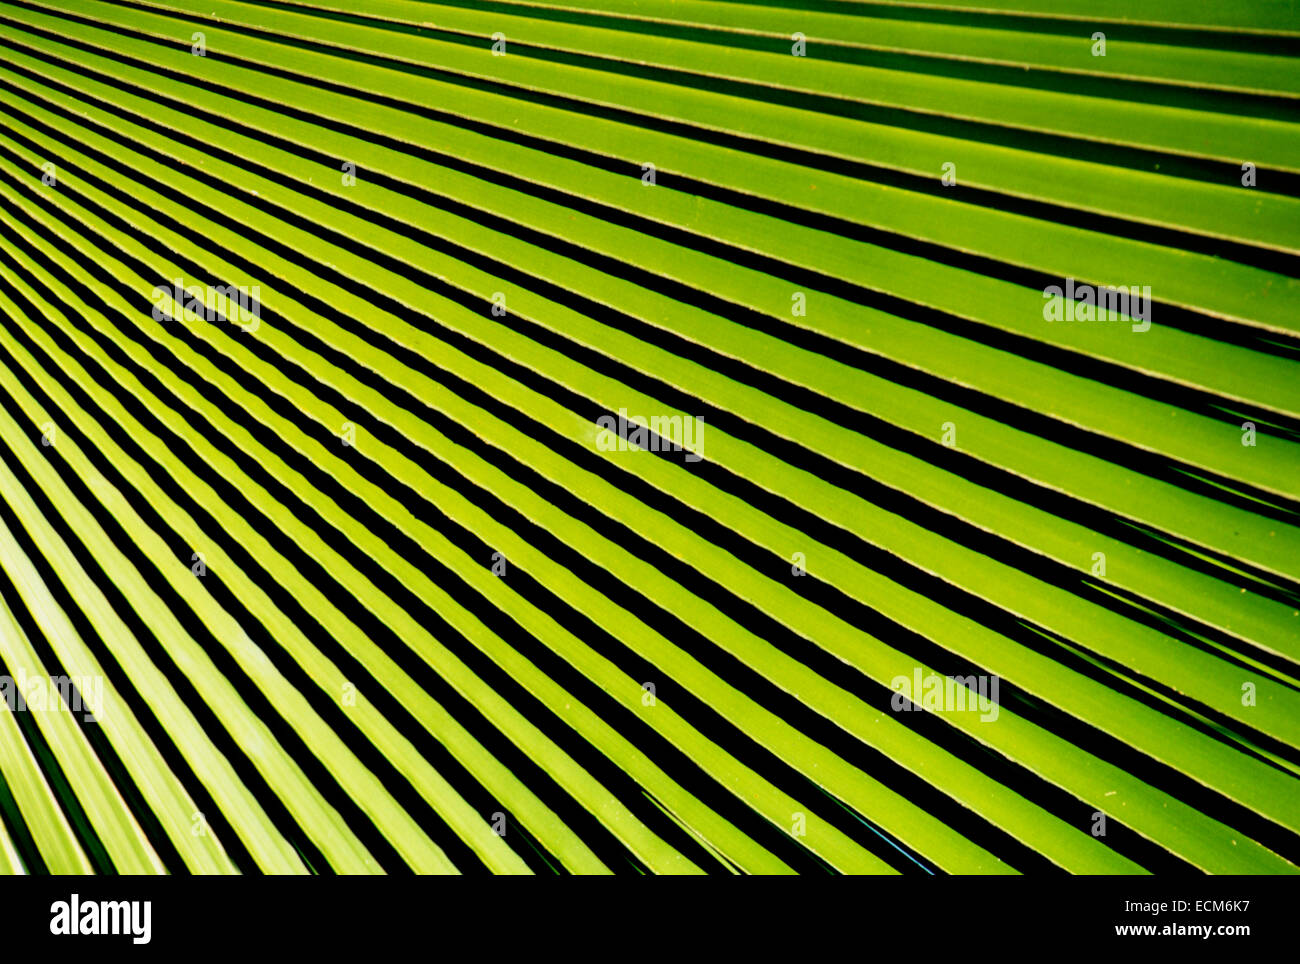 Abstract patterns of shadow and light on bright green tropical palm fronds and leaves. Stock Photo